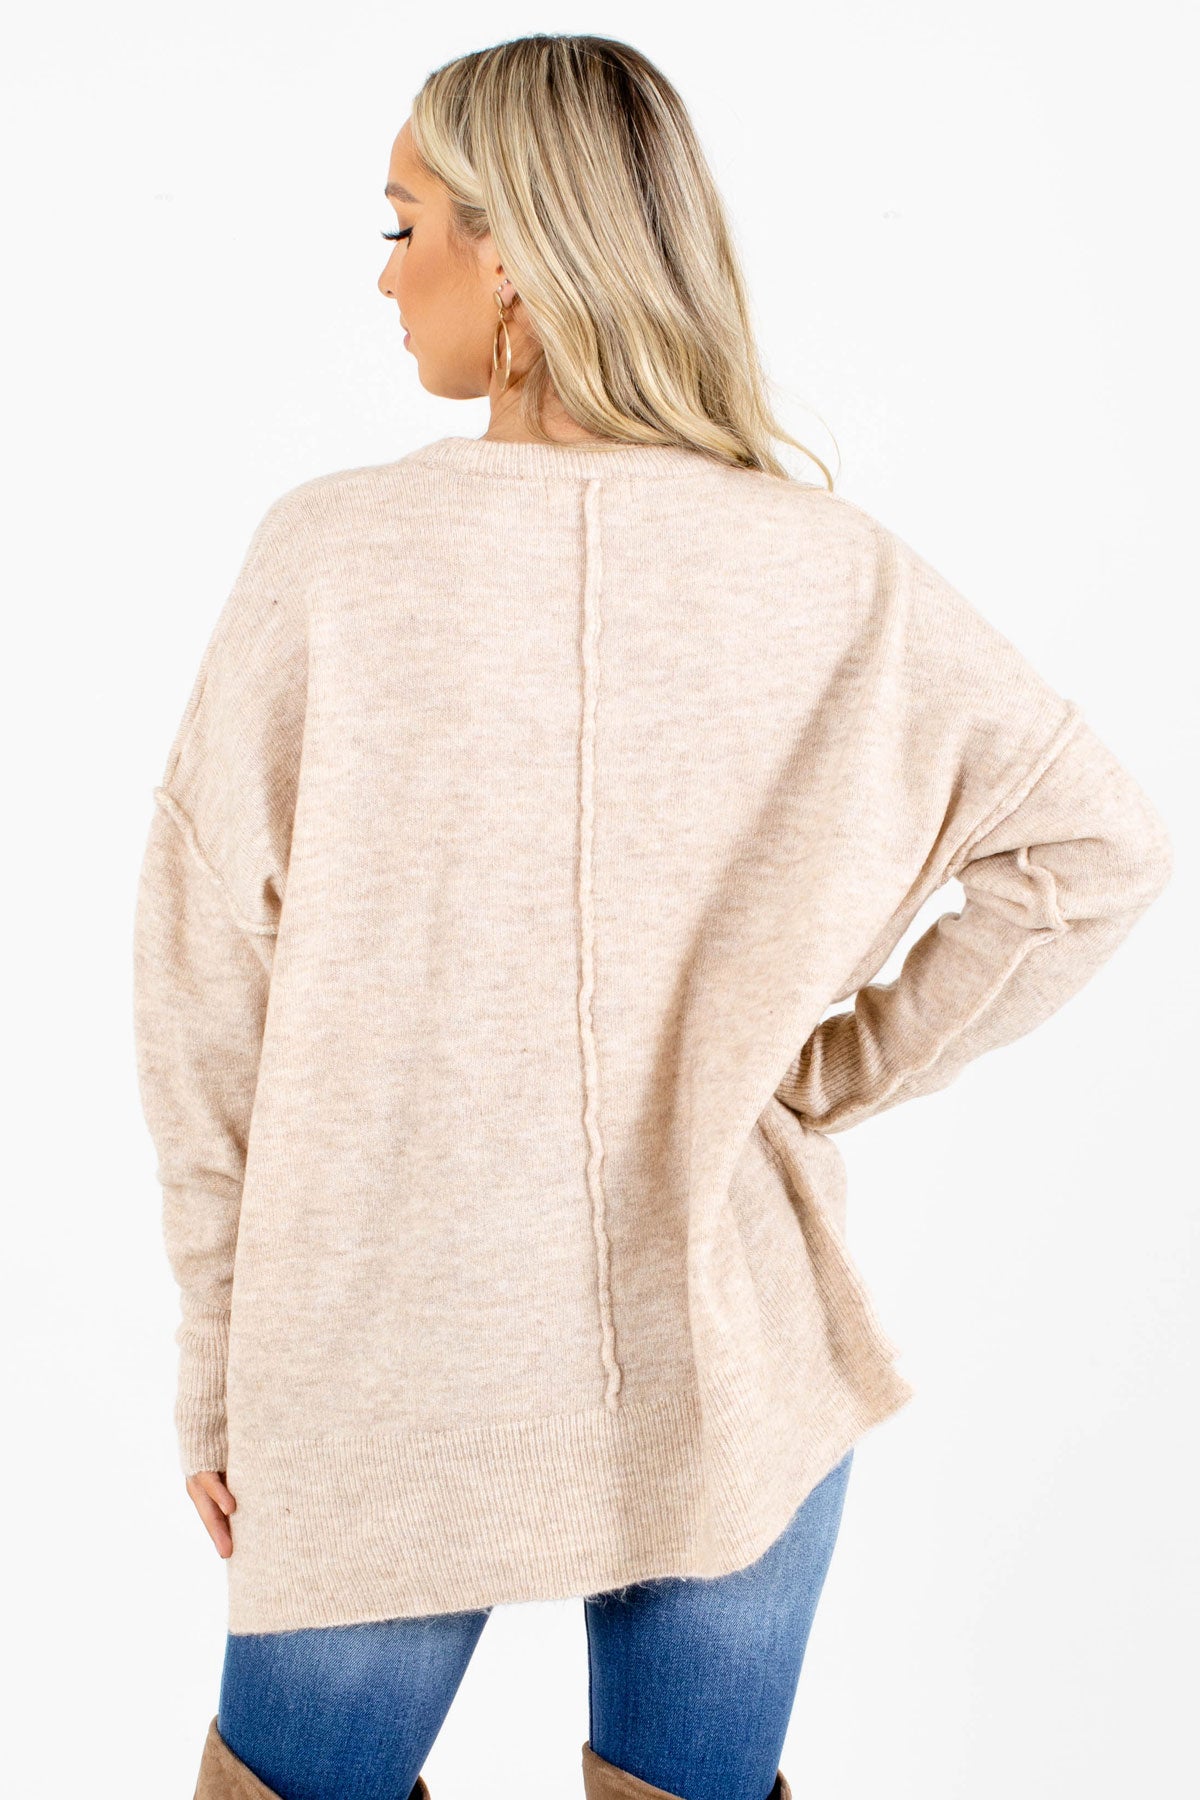 Women's Beige Fall and Winter Boutique Clothing